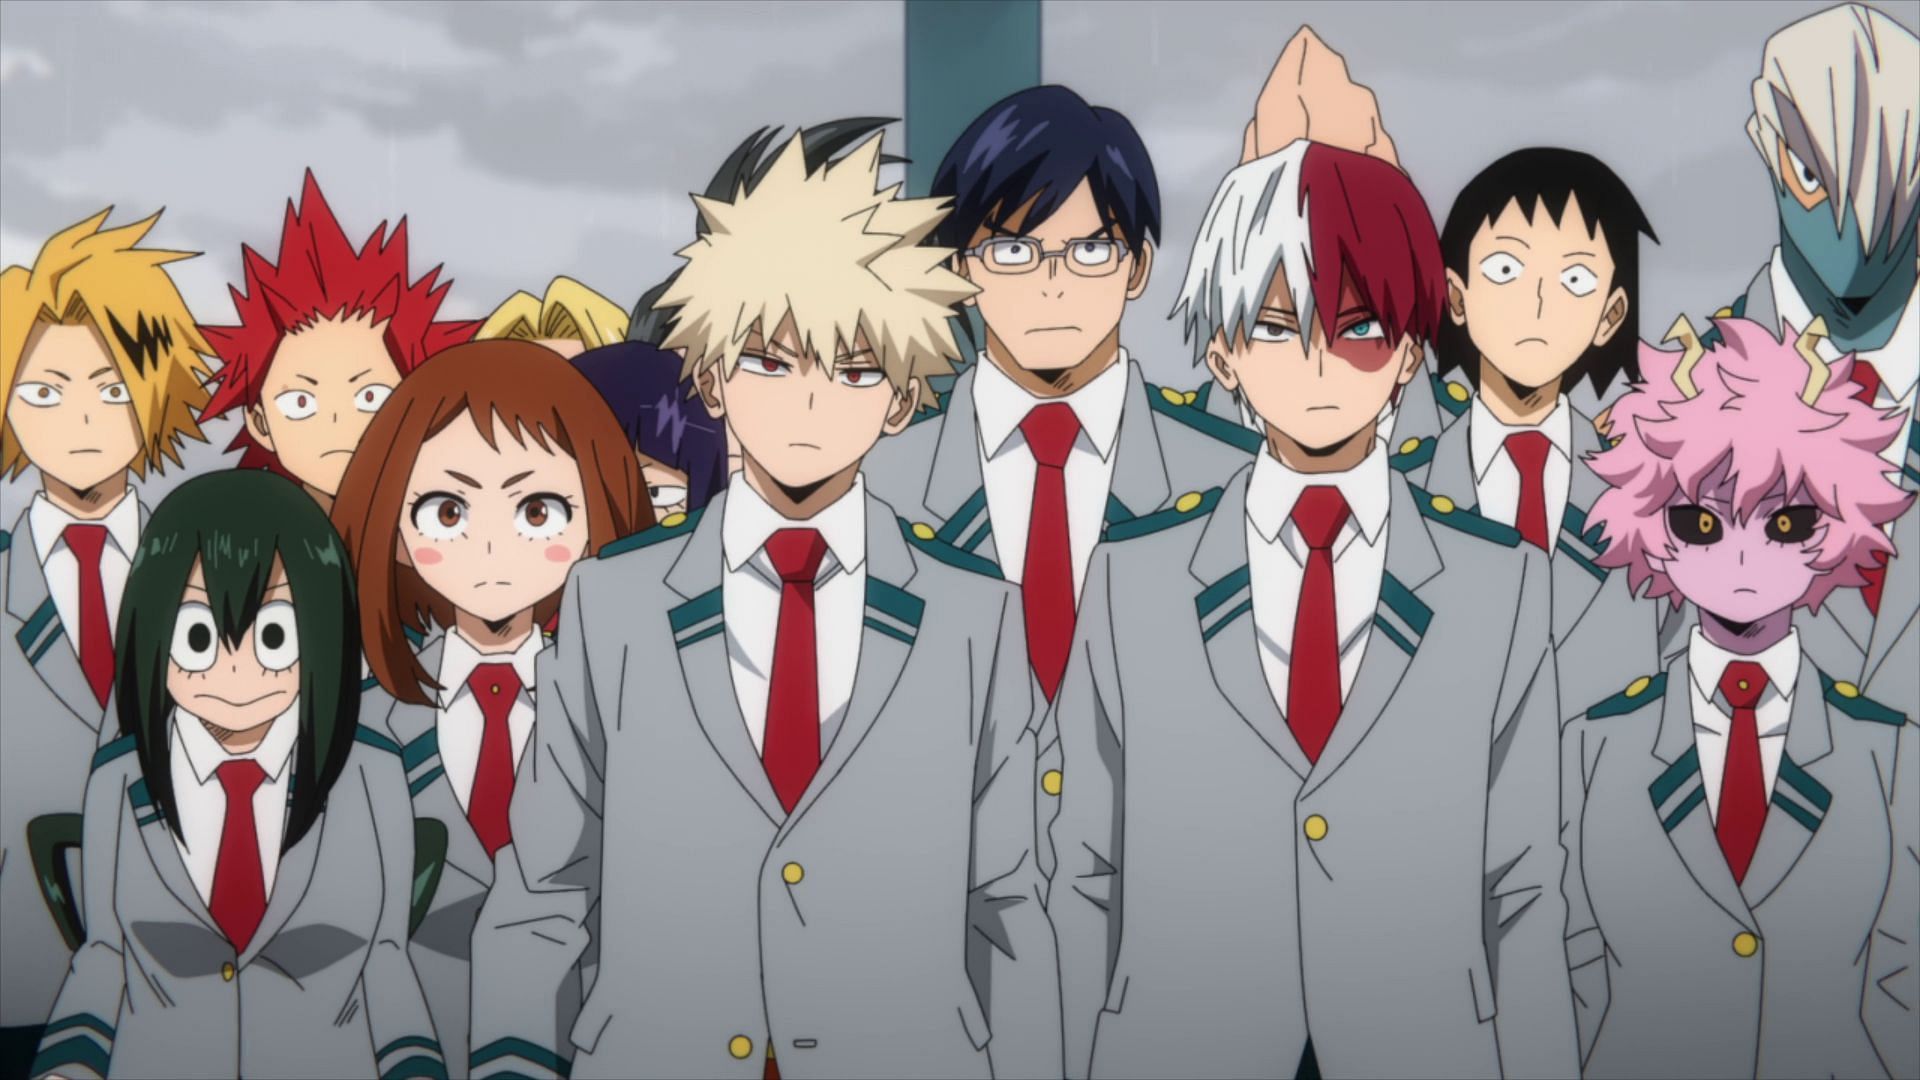 Class 1-A and more arrive to help Deku finish off All For One and Tomura Shigaraki for good in My Hero Academia chapter 421 and beyond (Image via BONES)